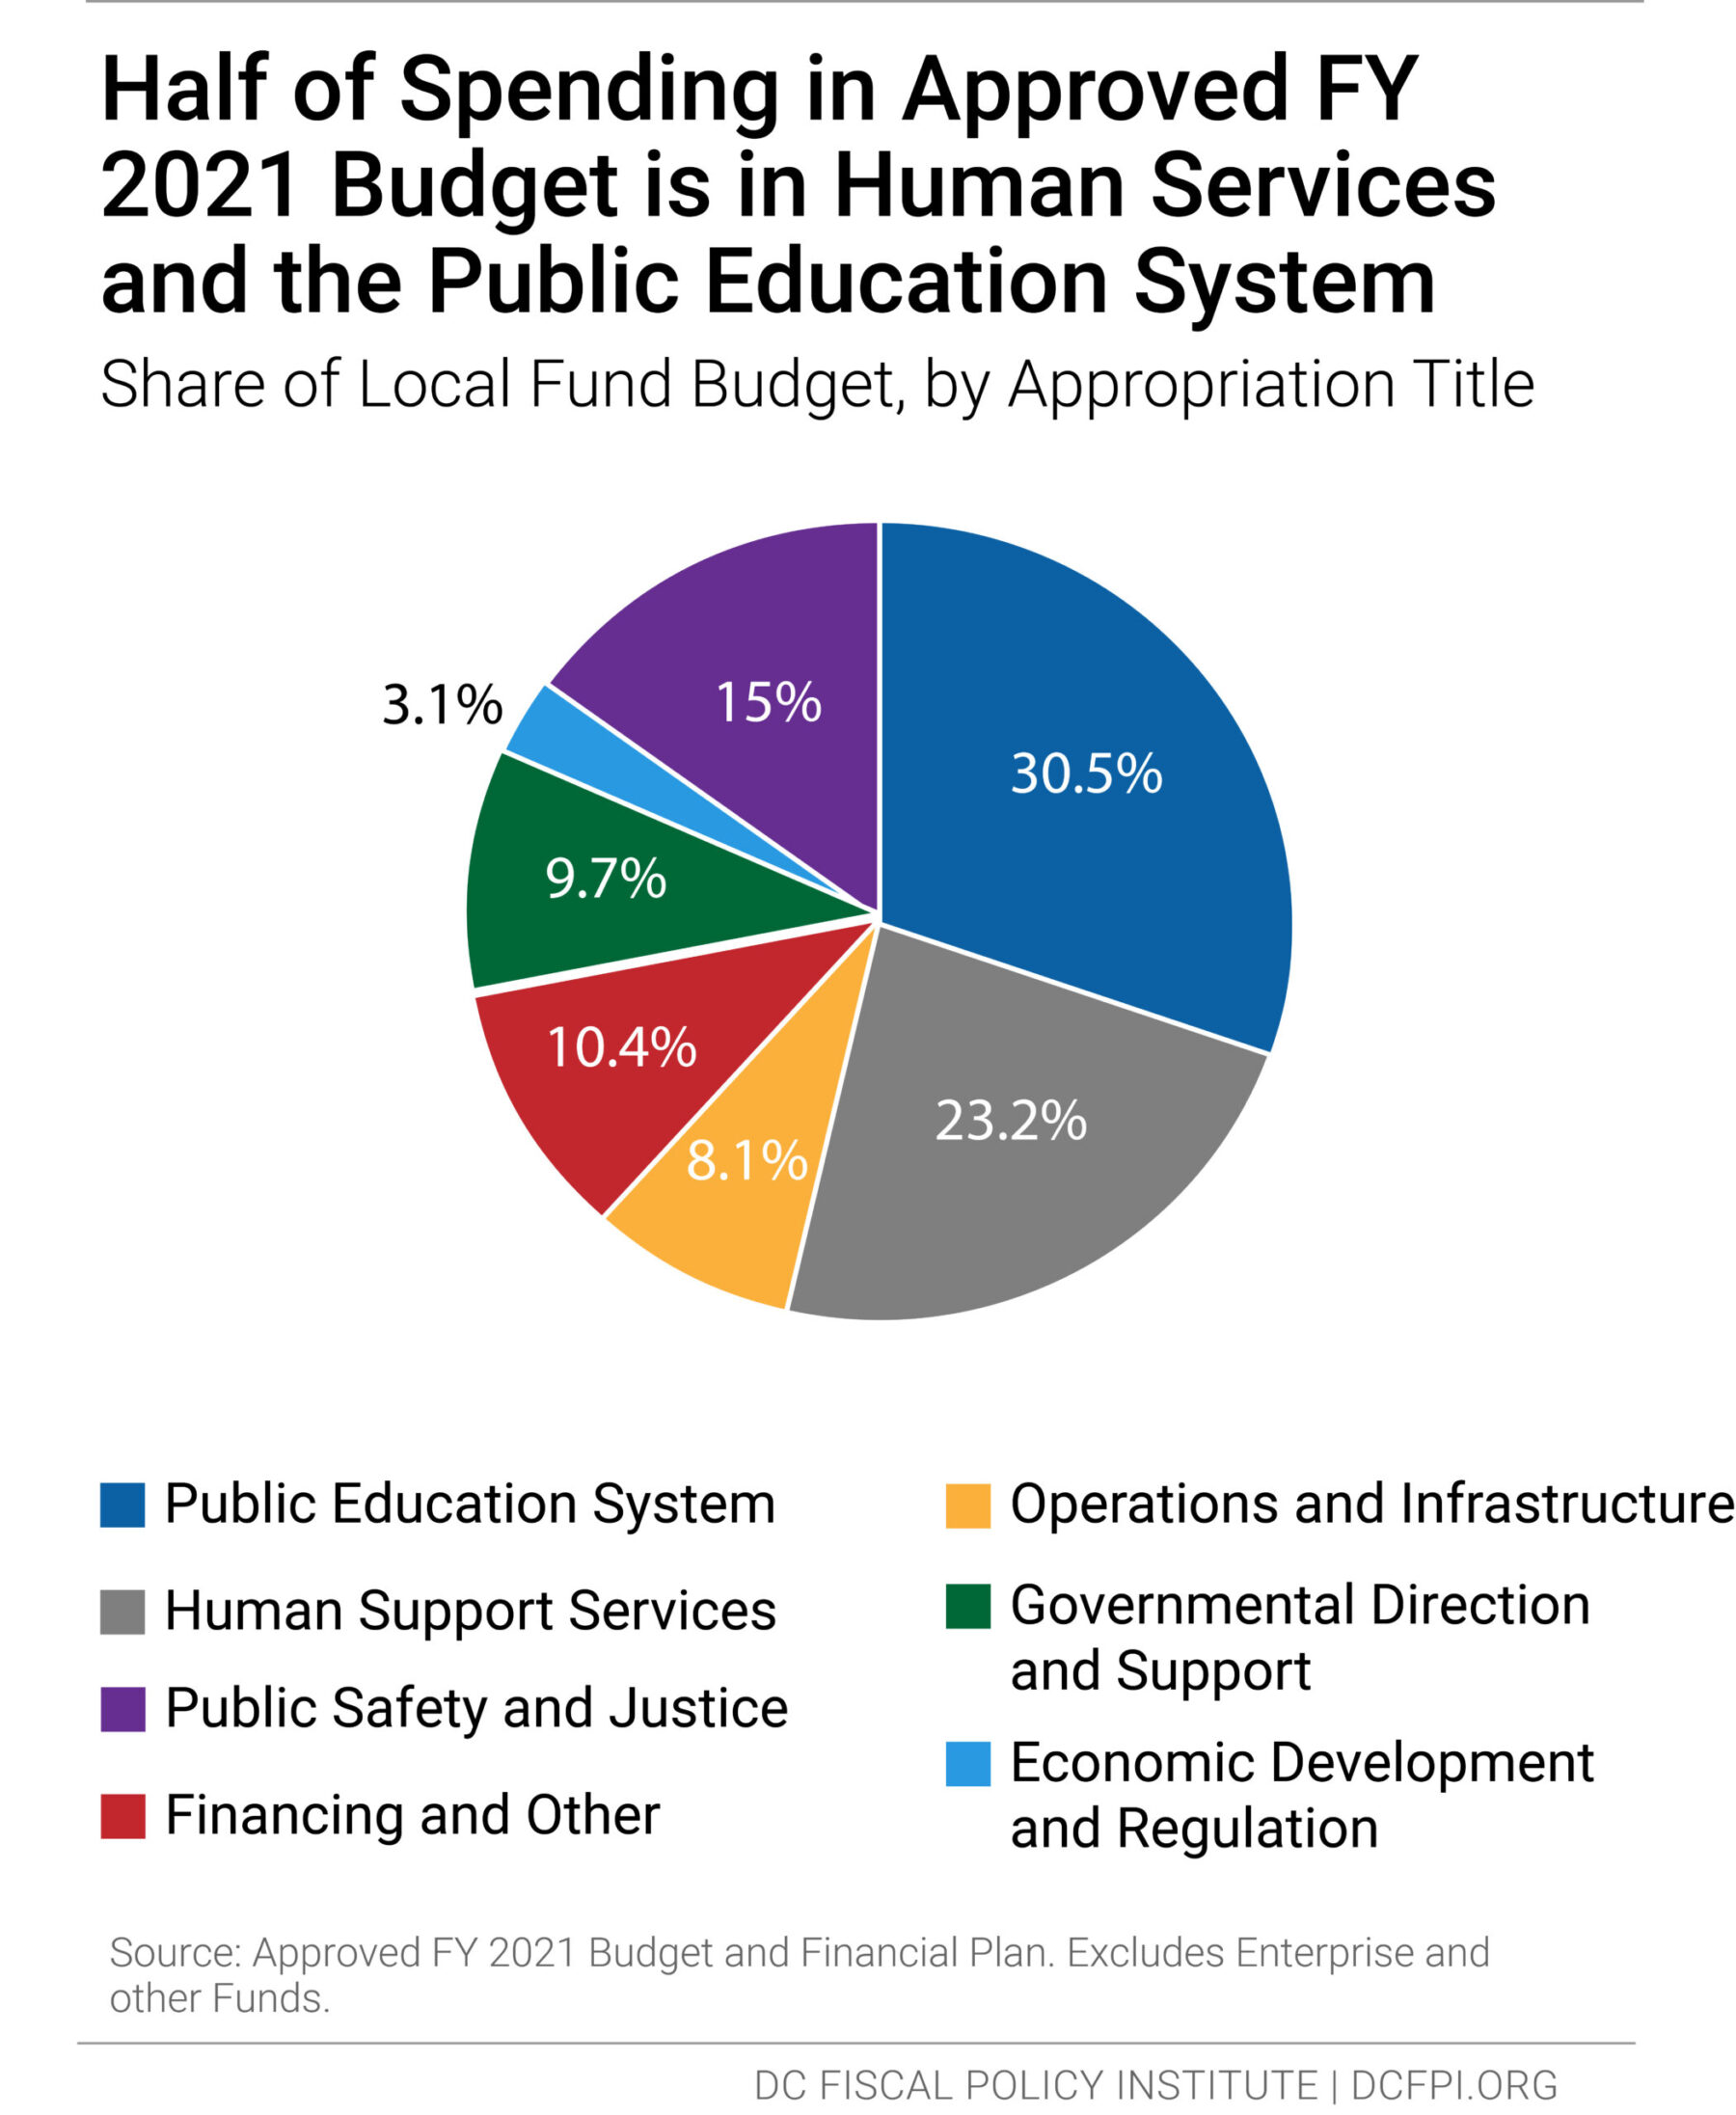 Pie chart showing that half of spending in approved FY 2021 budget is in human services and the public education system